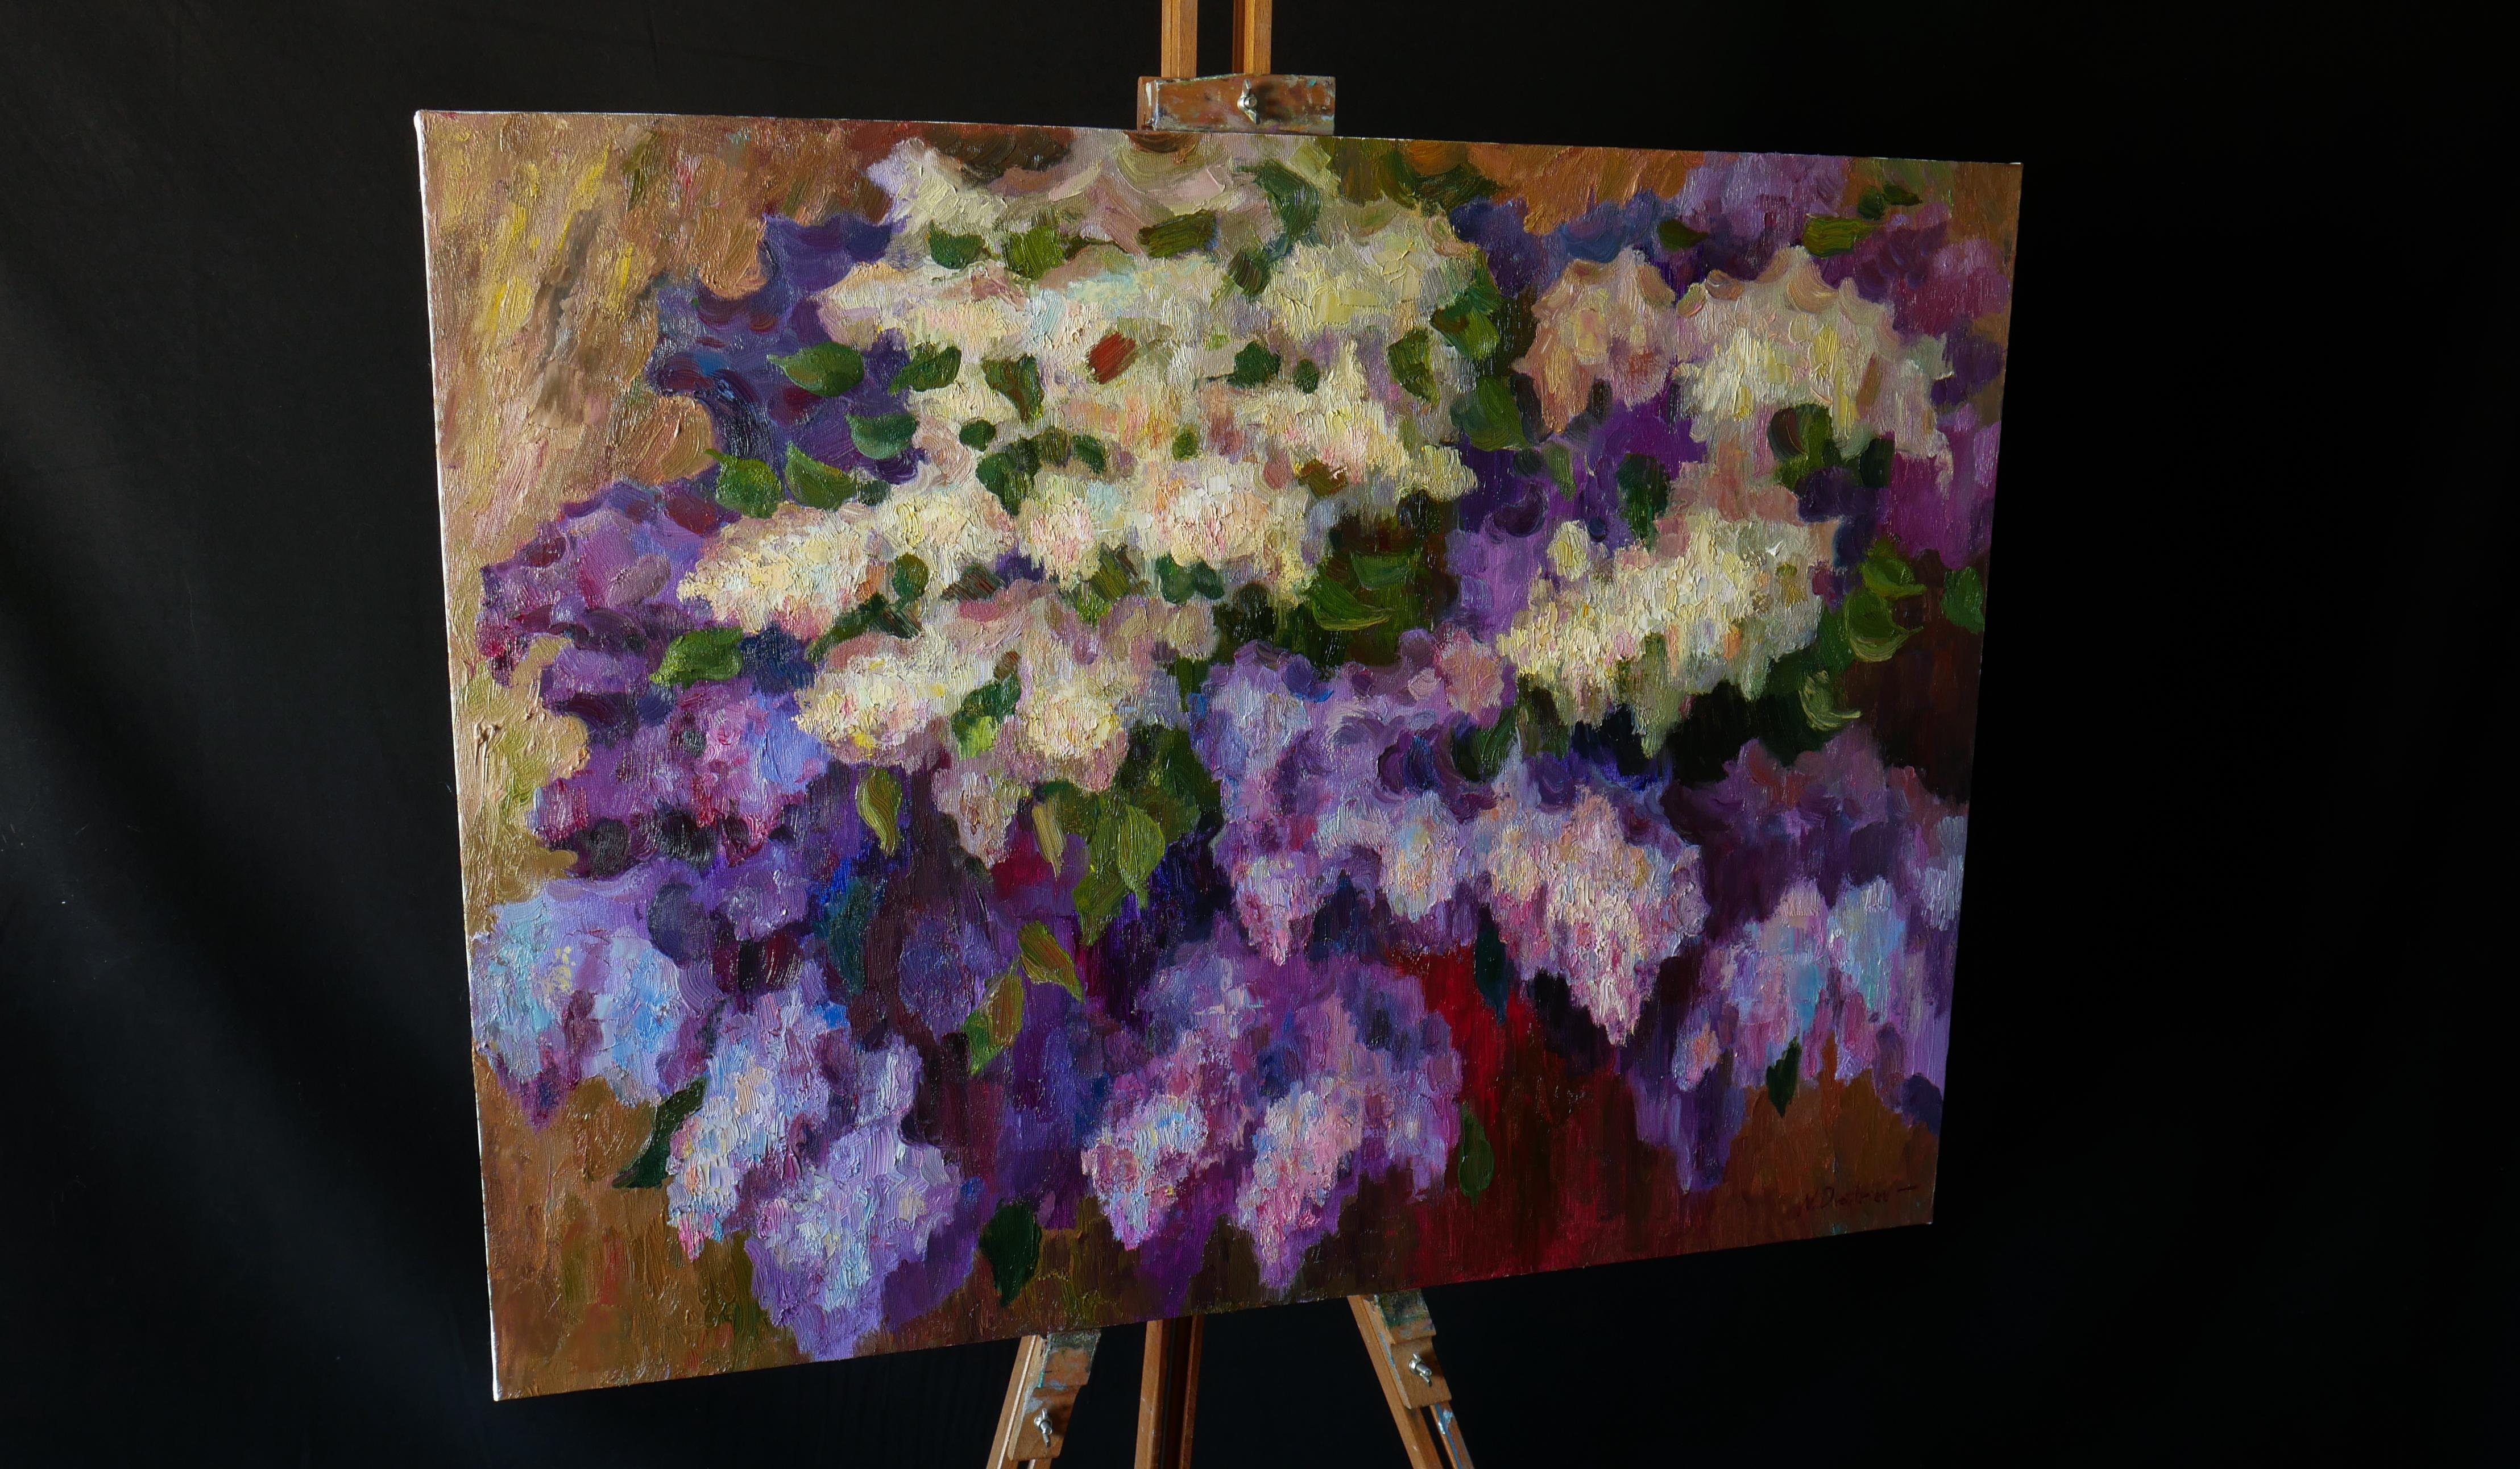 Lush Bouquet Of Lilacs - painting #3 - Painting by Nikolay Dmitriev